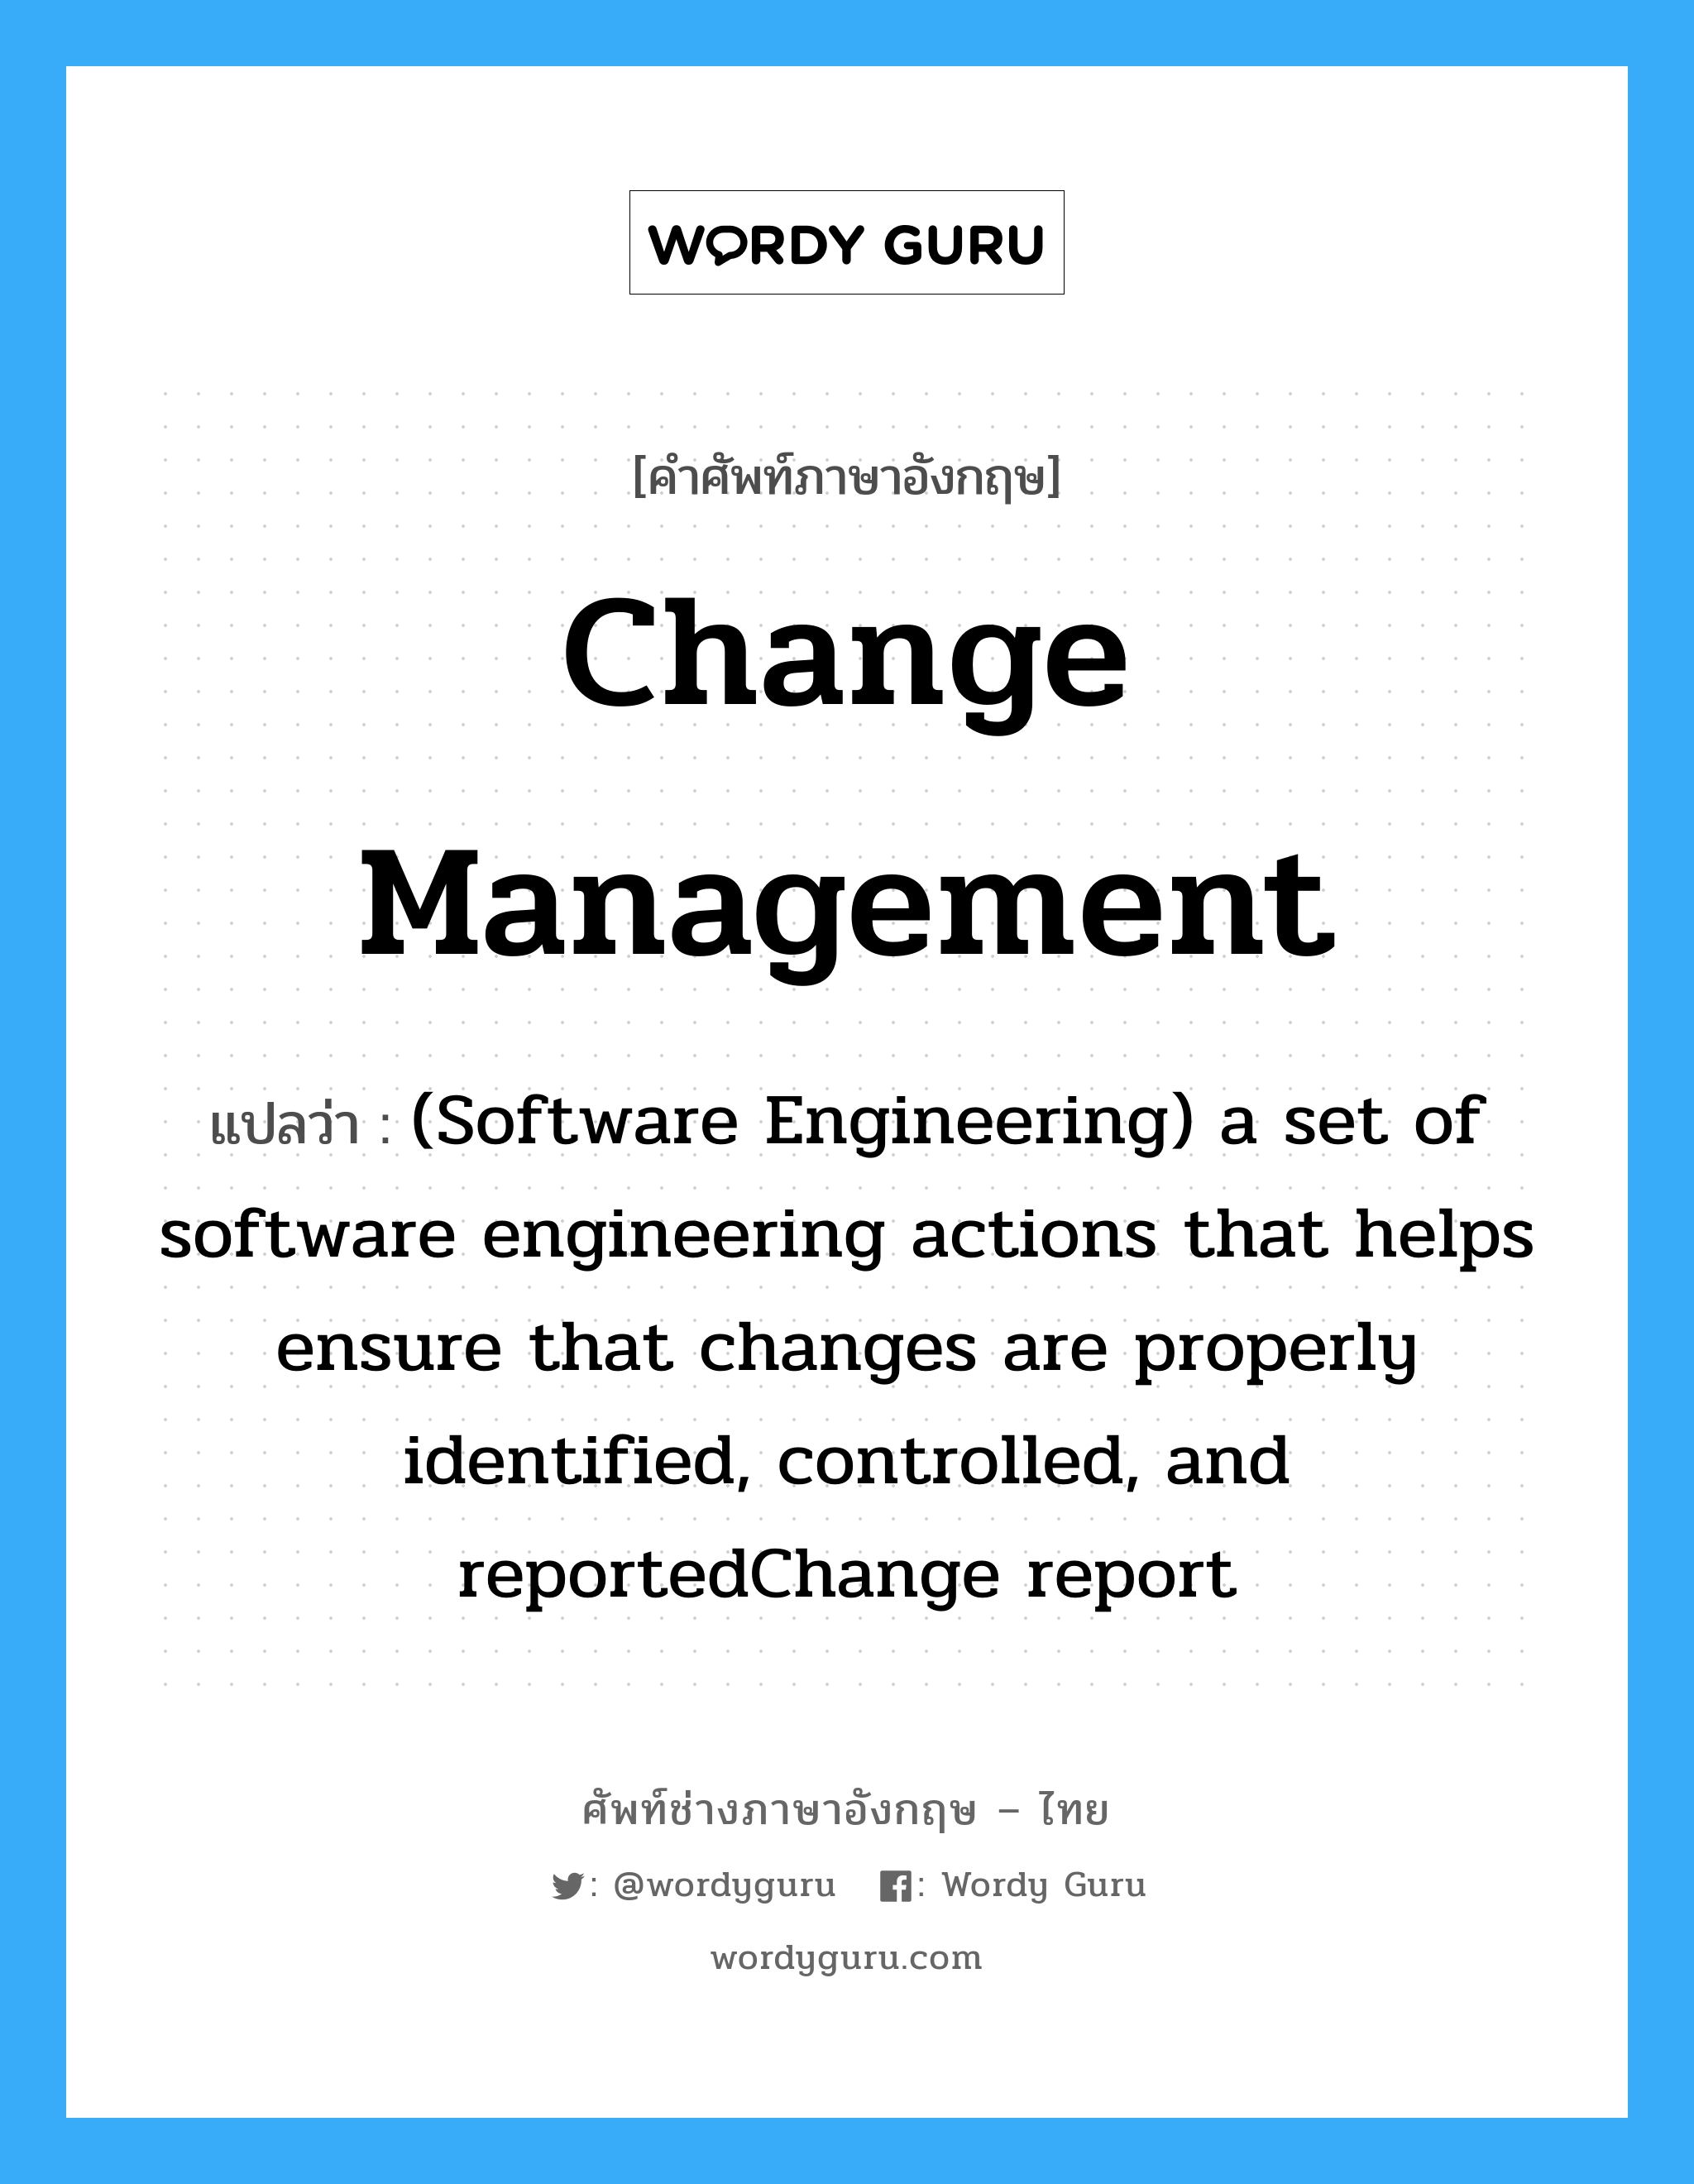 Change management แปลว่า?, คำศัพท์ช่างภาษาอังกฤษ - ไทย Change management คำศัพท์ภาษาอังกฤษ Change management แปลว่า (Software Engineering) a set of software engineering actions that helps ensure that changes are properly identified, controlled, and reportedChange report